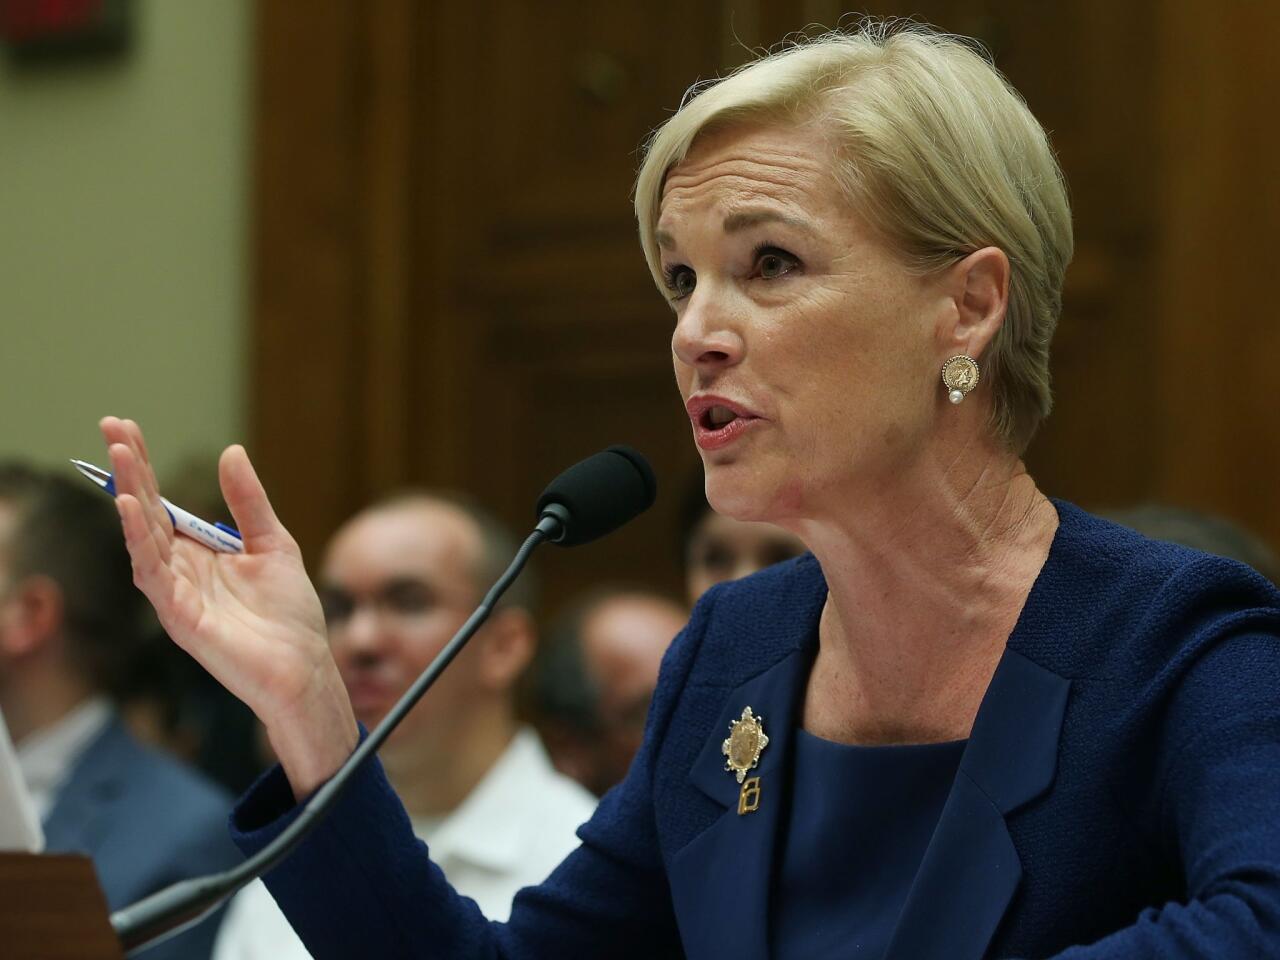 Cecile Richards, president of Planned Parenthood, testifies during a House Oversight and Government Reform Committee hearing on Capitol Hill on Sept. 29, 2015, in Washington, D.C.